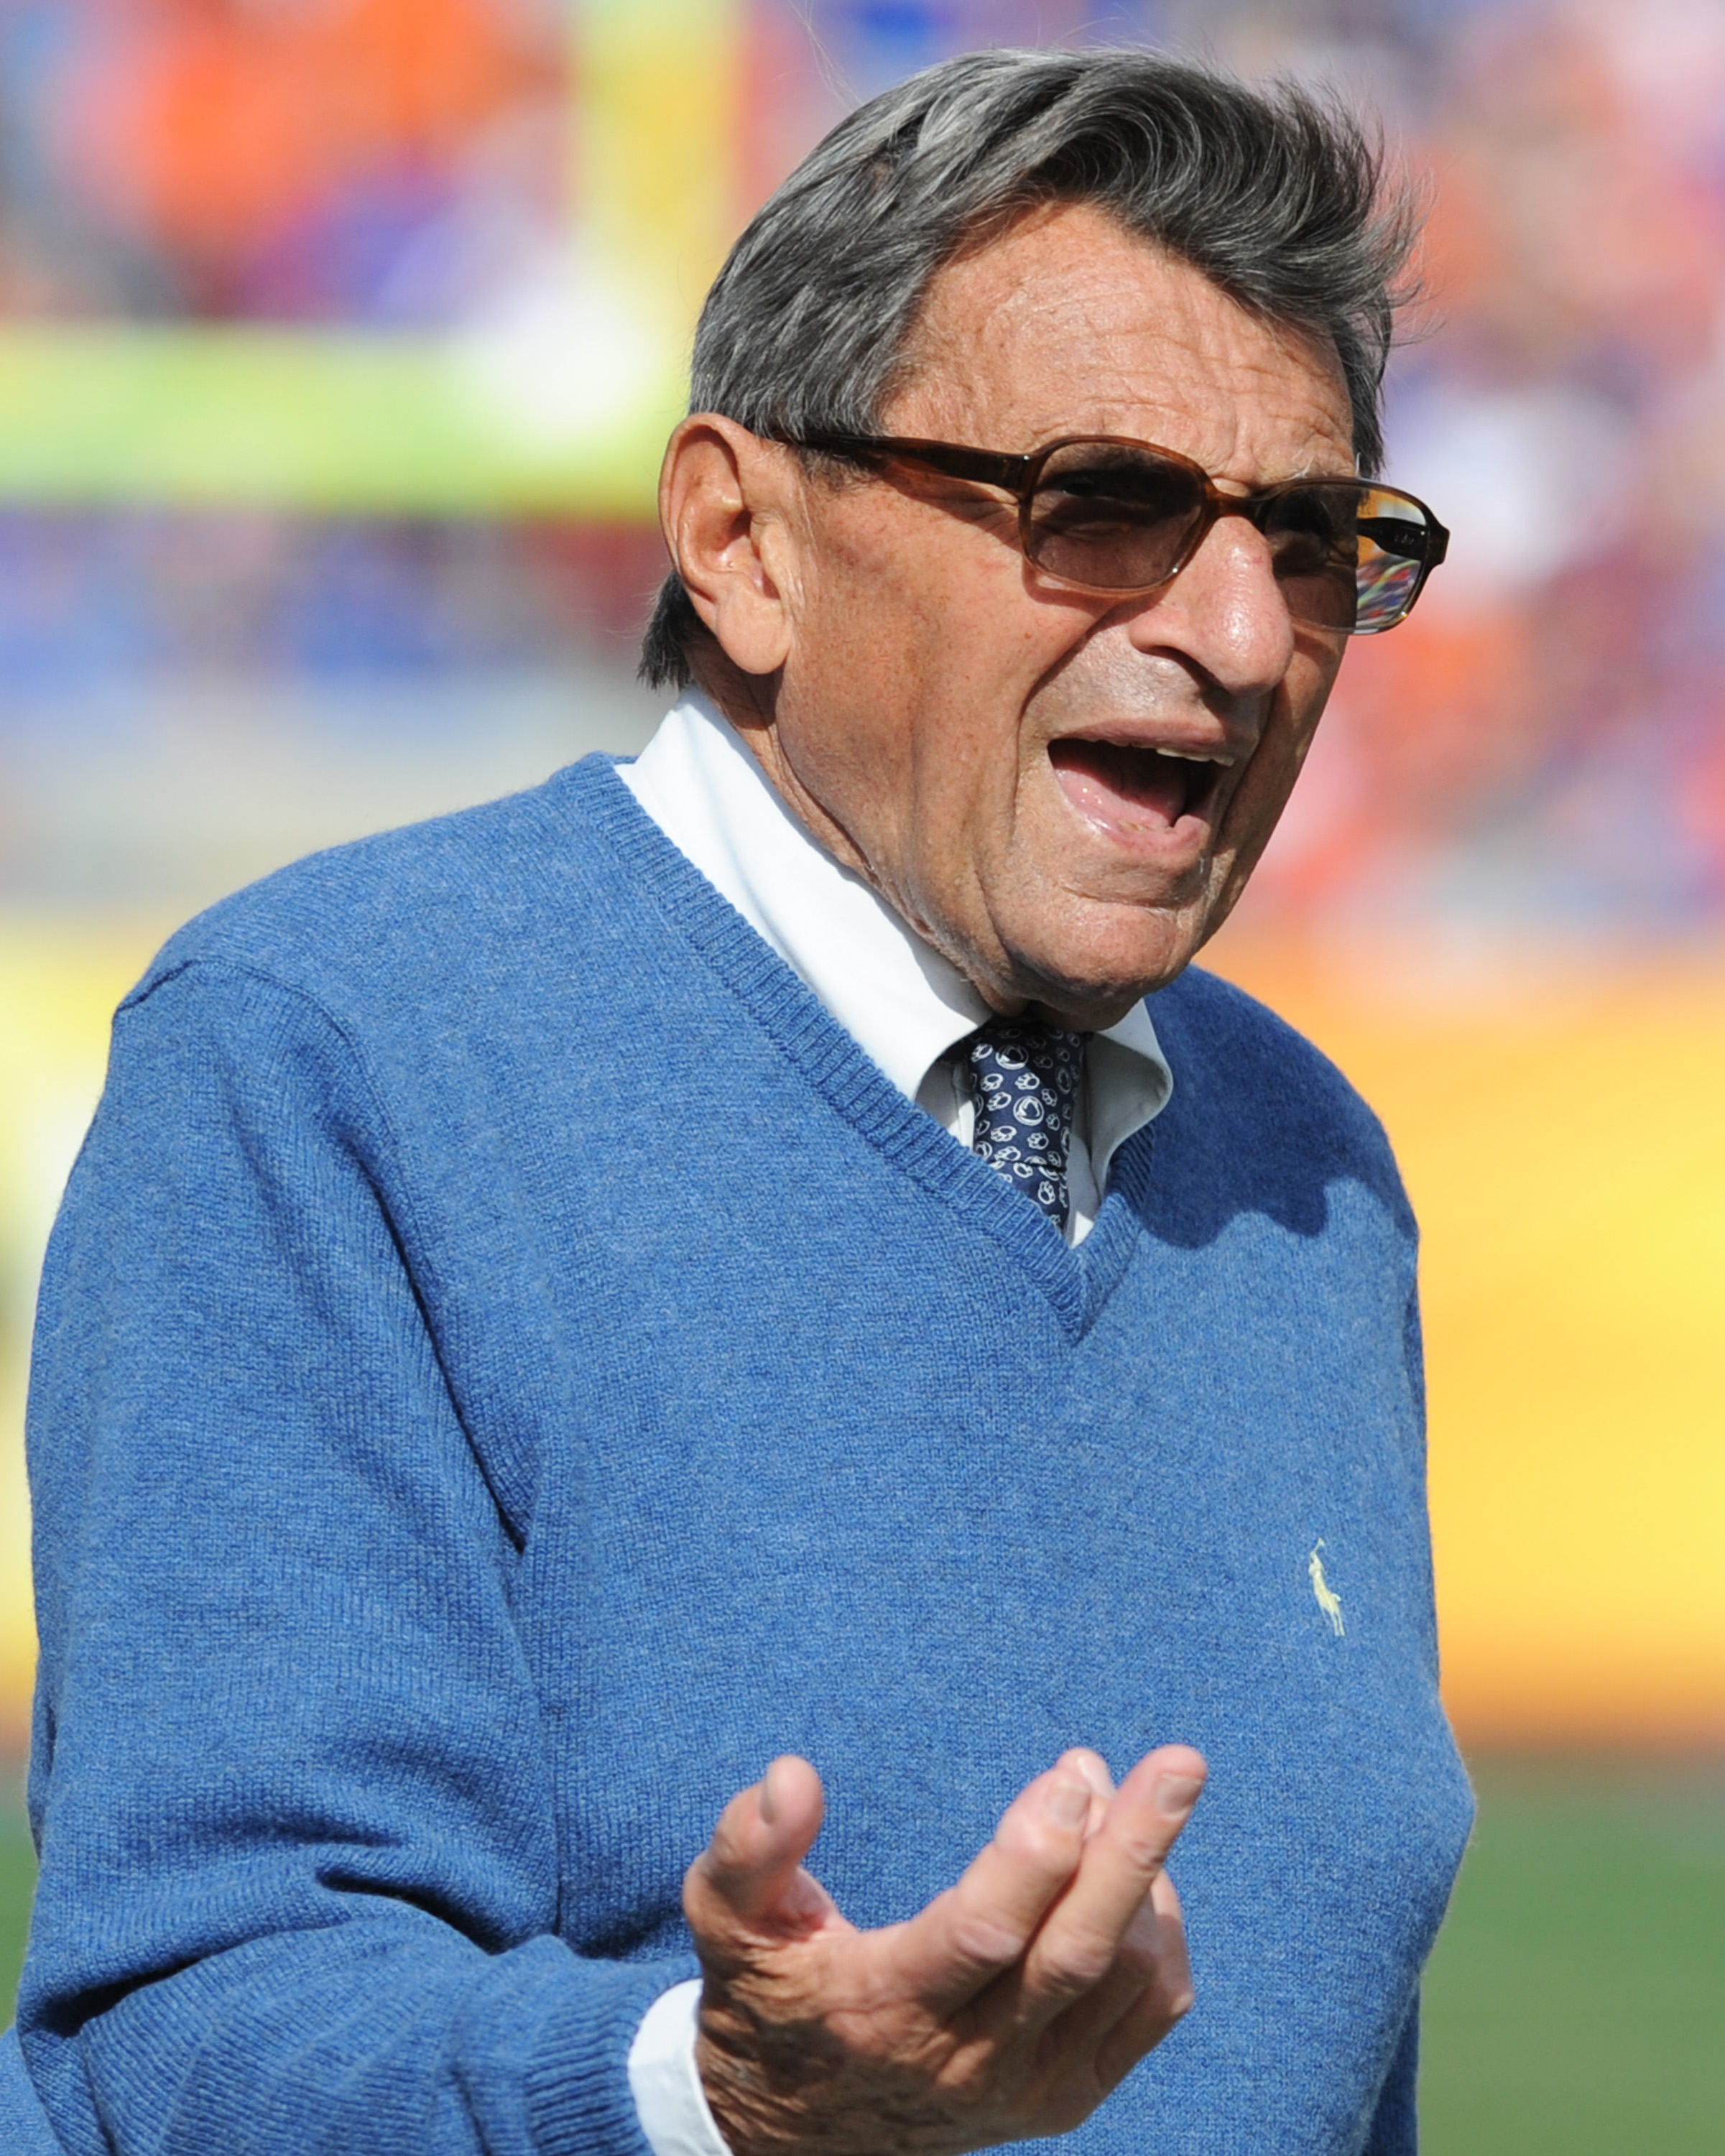 TAMPA, FL - JANUARY 1:  Coach Joe Paterno of the Penn State Nittany Lions directs play against the Florida Gators January 1, 2011 in the 25th Outback Bowl at Raymond James Stadium in Tampa, Florida.  (Photo by Al Messerschmidt/Getty Images)